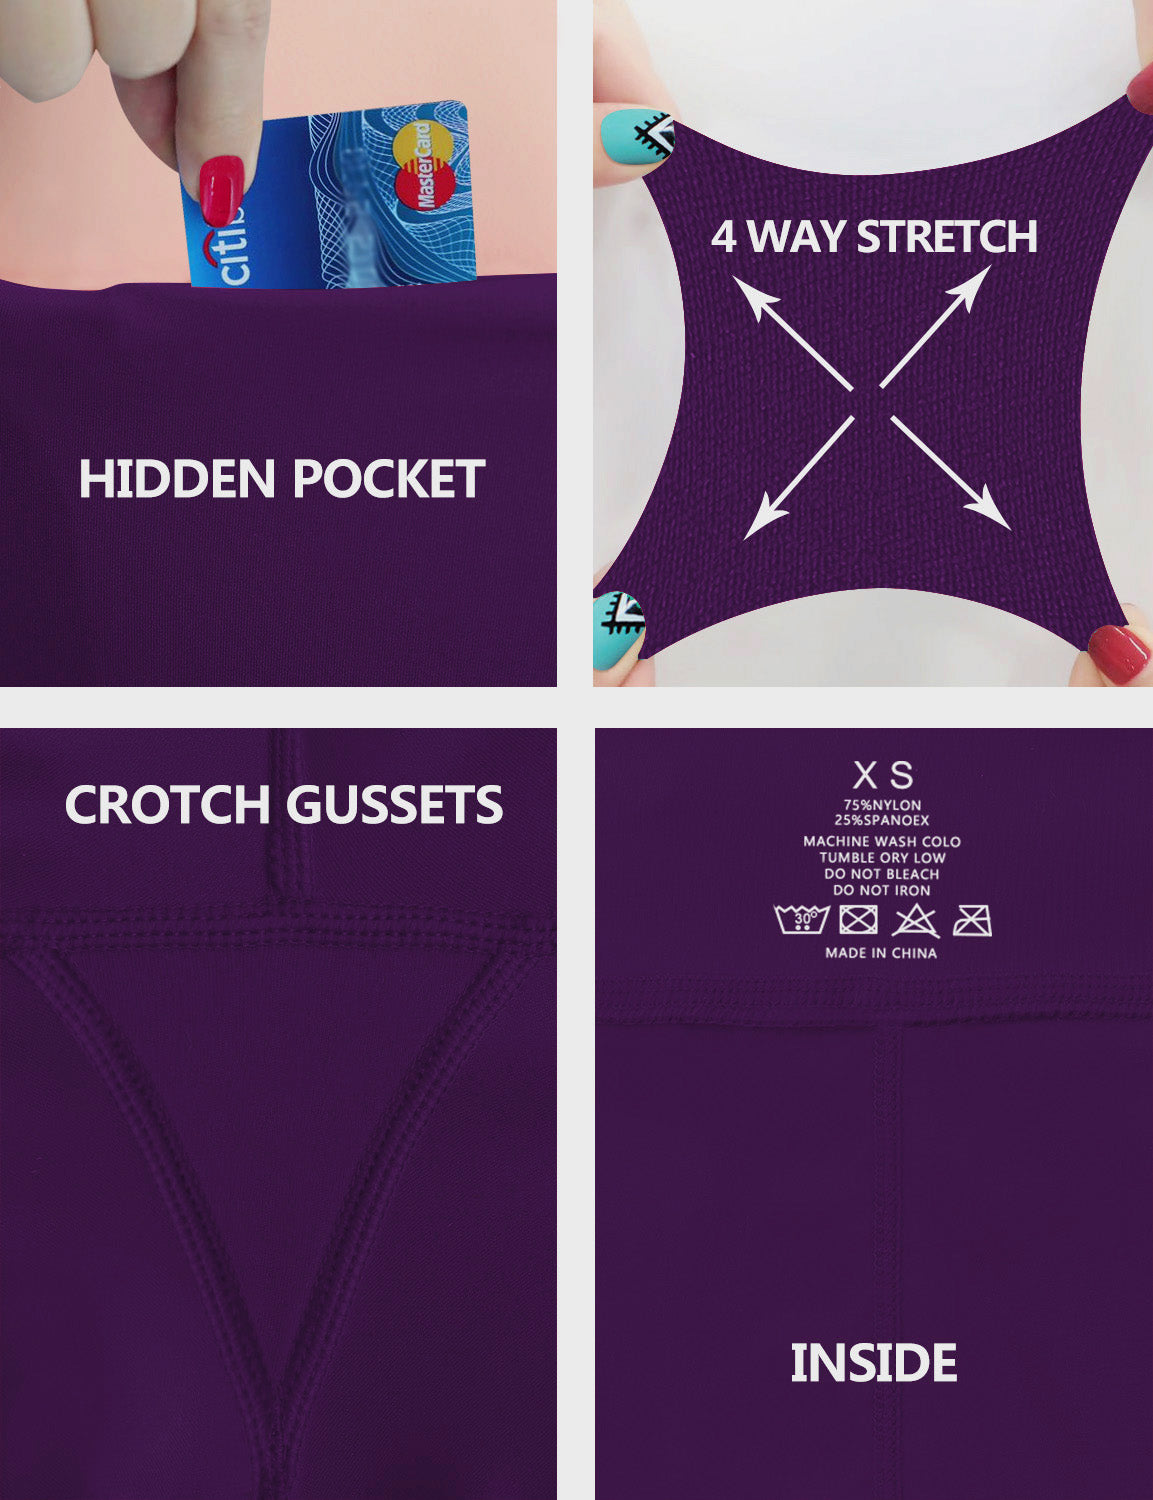 High Waist Side Pockets Gym Pants eggplantpurple 75% Nylon, 25% Spandex Fabric doesn't attract lint easily 4-way stretch No see-through Moisture-wicking Tummy control Inner pocket